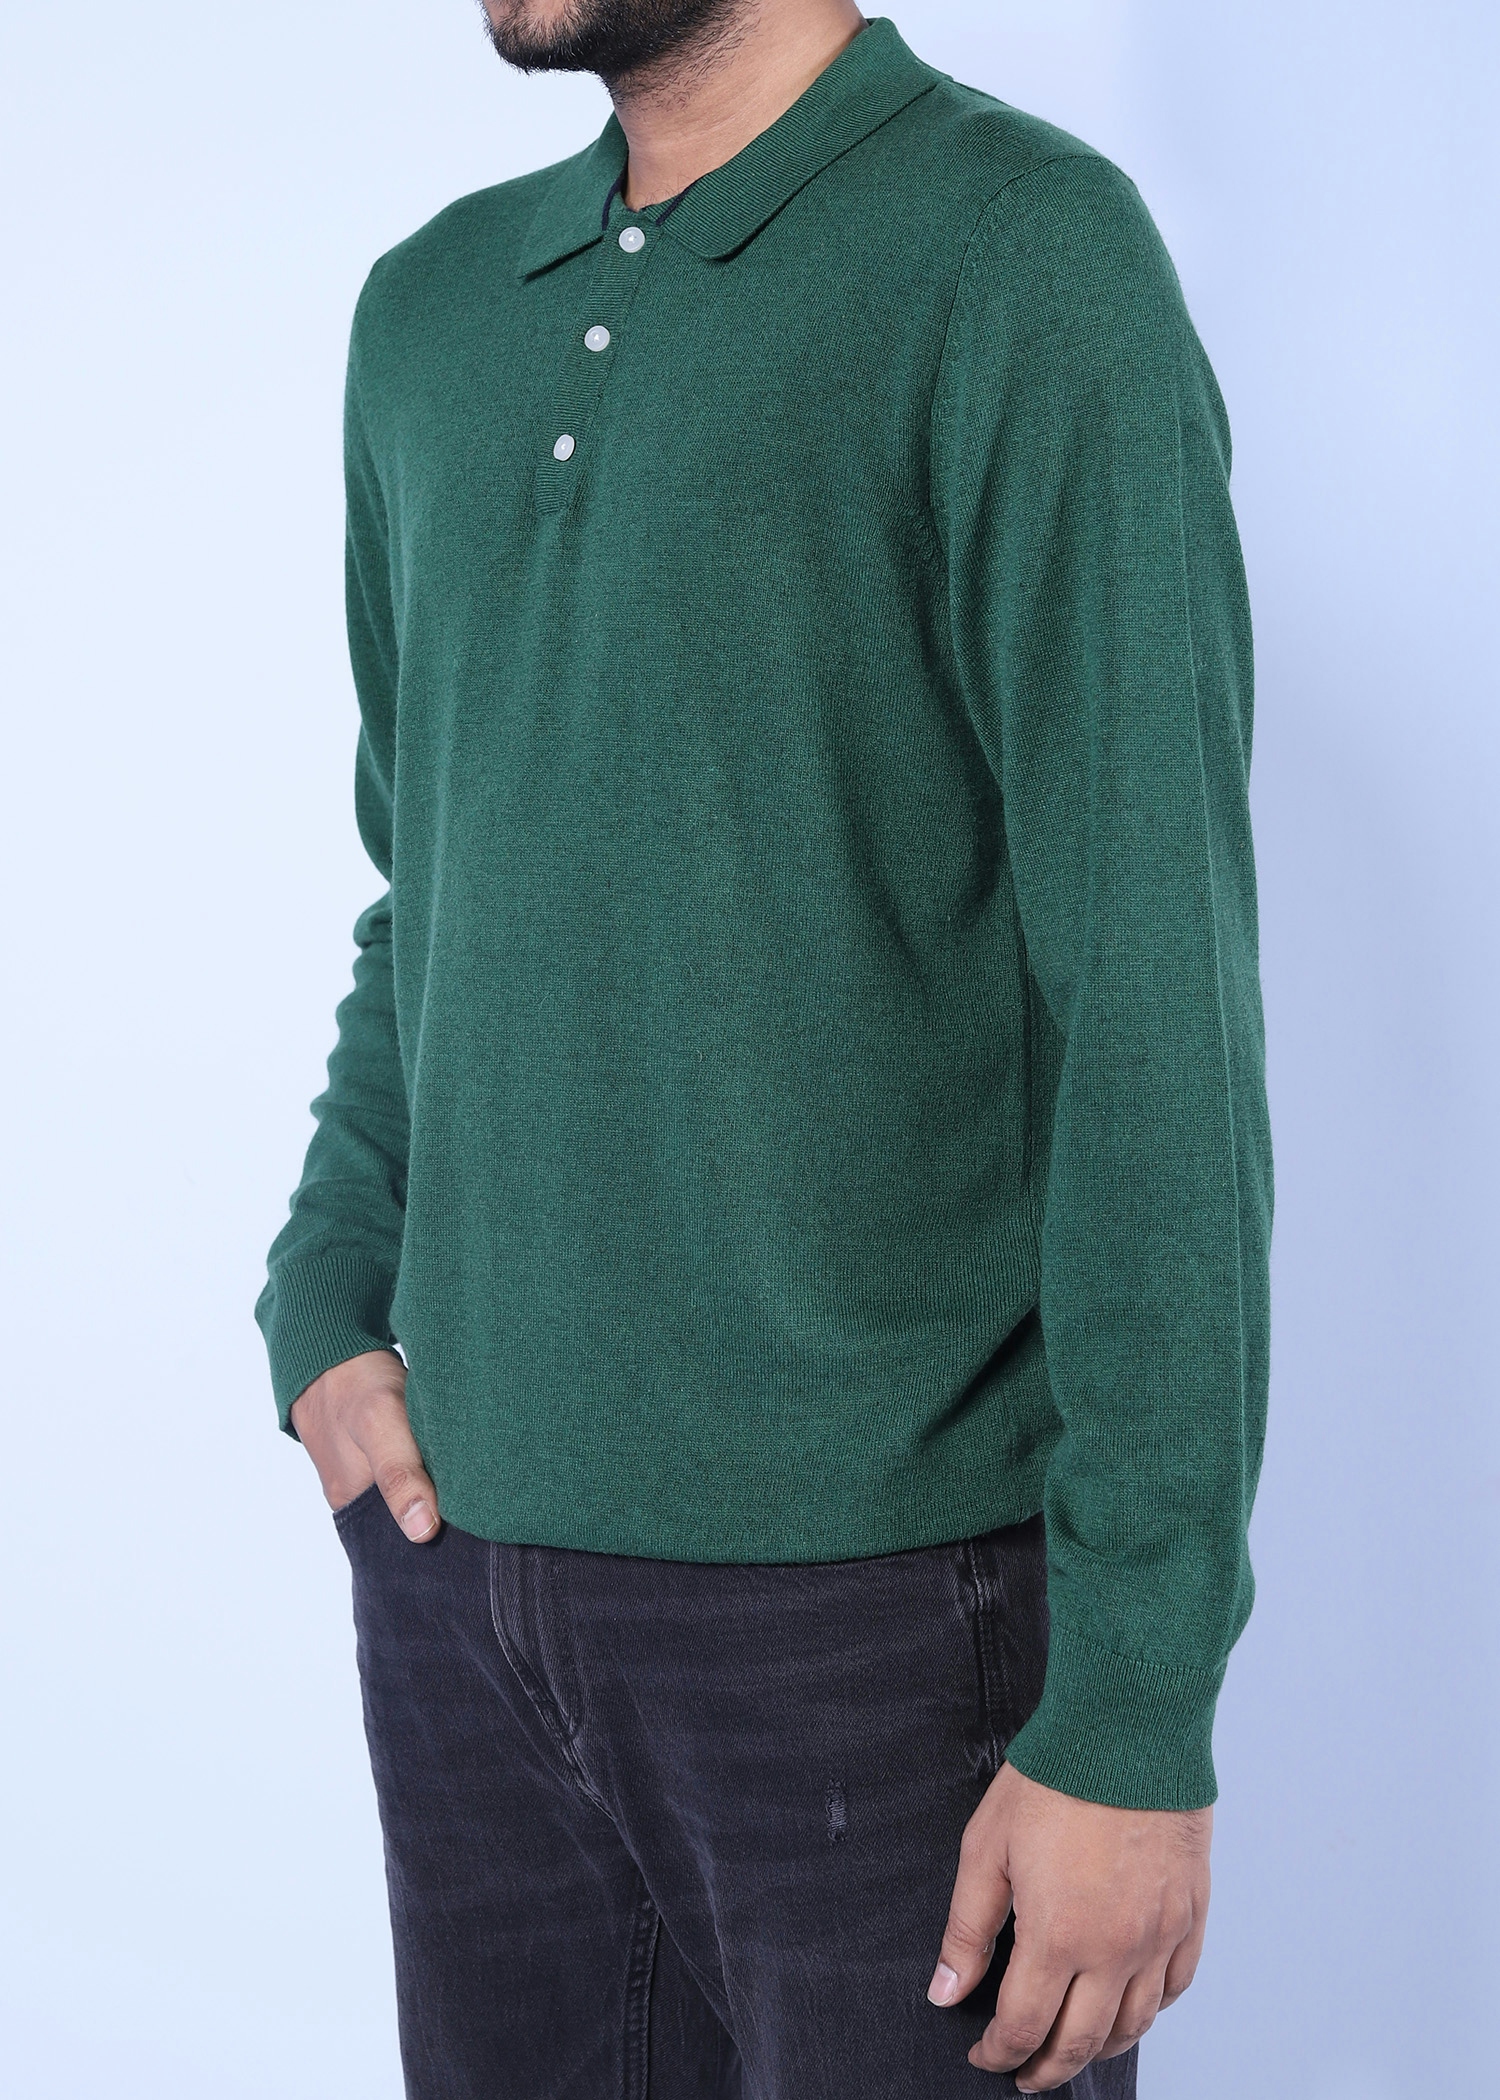 athens sweater green color half side view